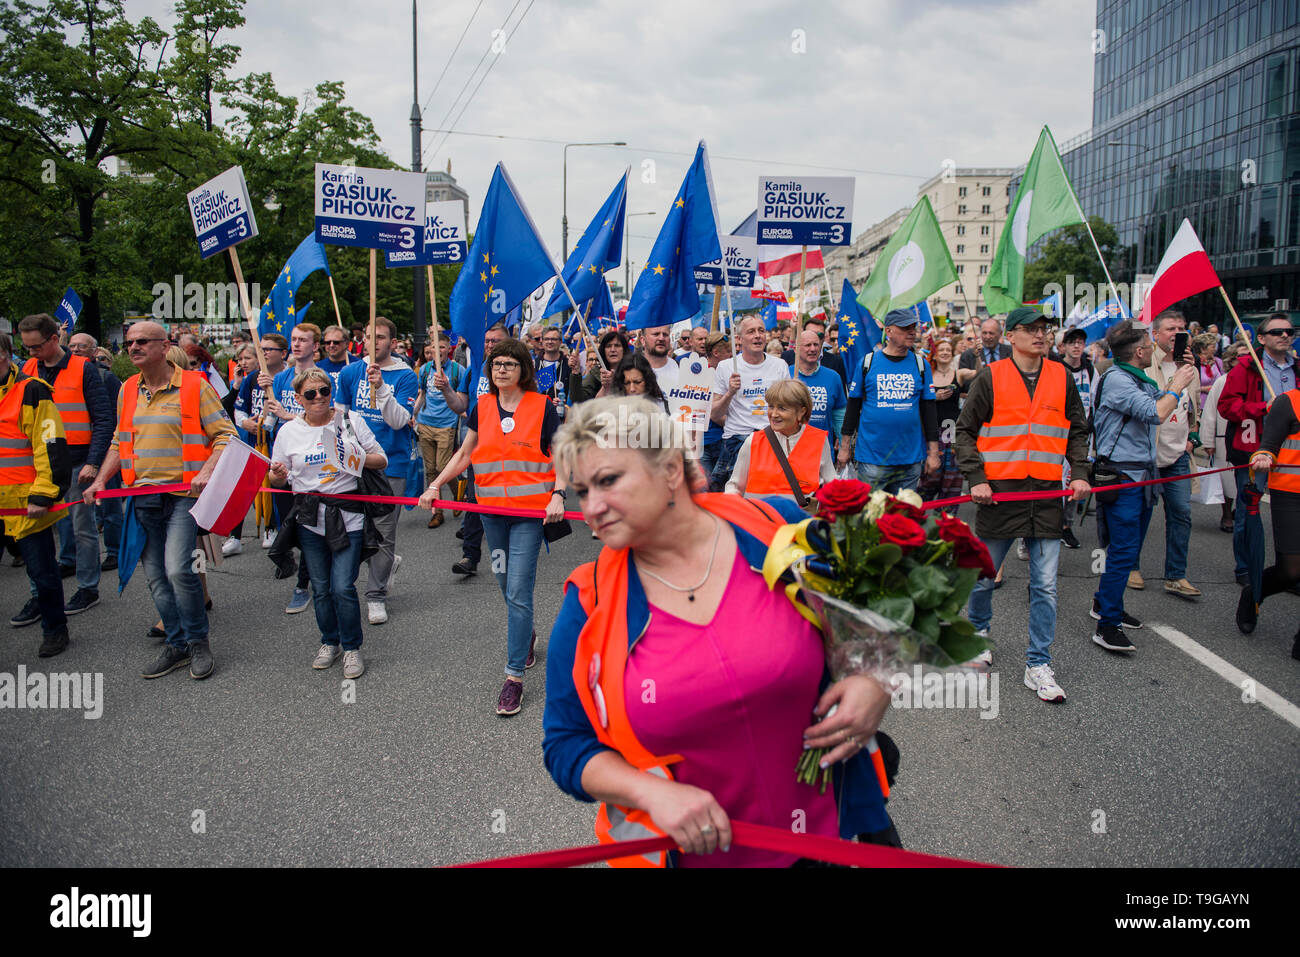 A woman is seen with flowers during the march. The march 'Poland in Europe' (Polska w Europie), was organized by the European Coalition (Koalicja Europejska) an alliance of political parties. The march was led by the leaders of the opposition parties and the President of the European Council, Donald Tusk. Unofficially, the March for Europe gathered about 45 thousand people. Stock Photo